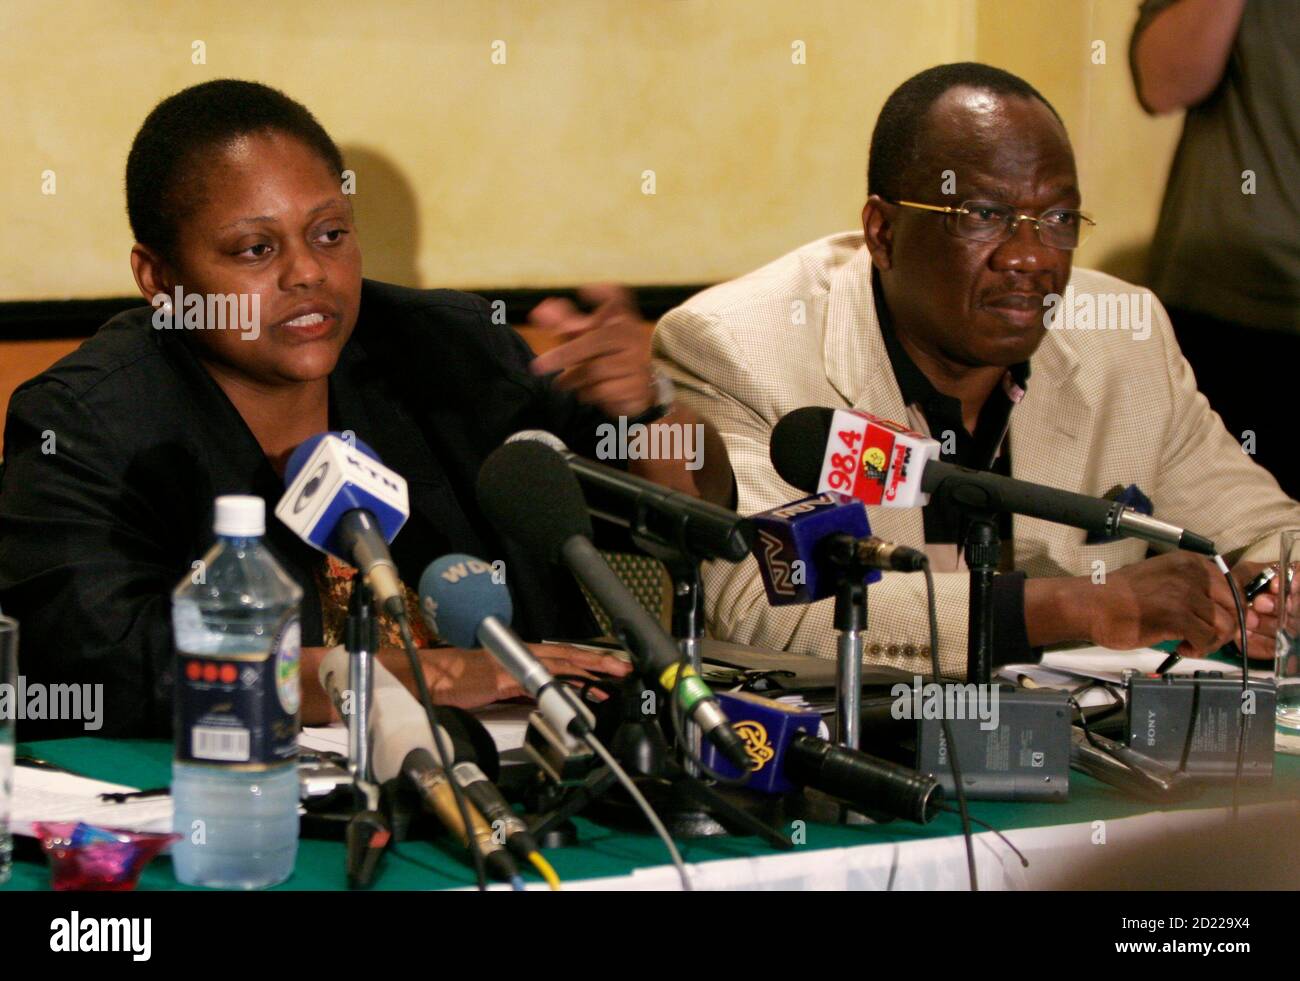 U.S. Assistant Secretary of State for African Affairs Jendayi Frazer (L), flanked by the U.N. special envoy to Somalia Francois Lonseny Fall, gestures during a news conference in Kenya's capital Nairobi January 7, 2007. Frazer has been shuttling around the region as western and African diplomats discuss an African peacekeeping force for Somalia after two weeks of war that saw Ethiopian and government troops force out Islamists who had captured much of the south. REUTERS/Thomas Mukoya (KENYA) Stock Photo